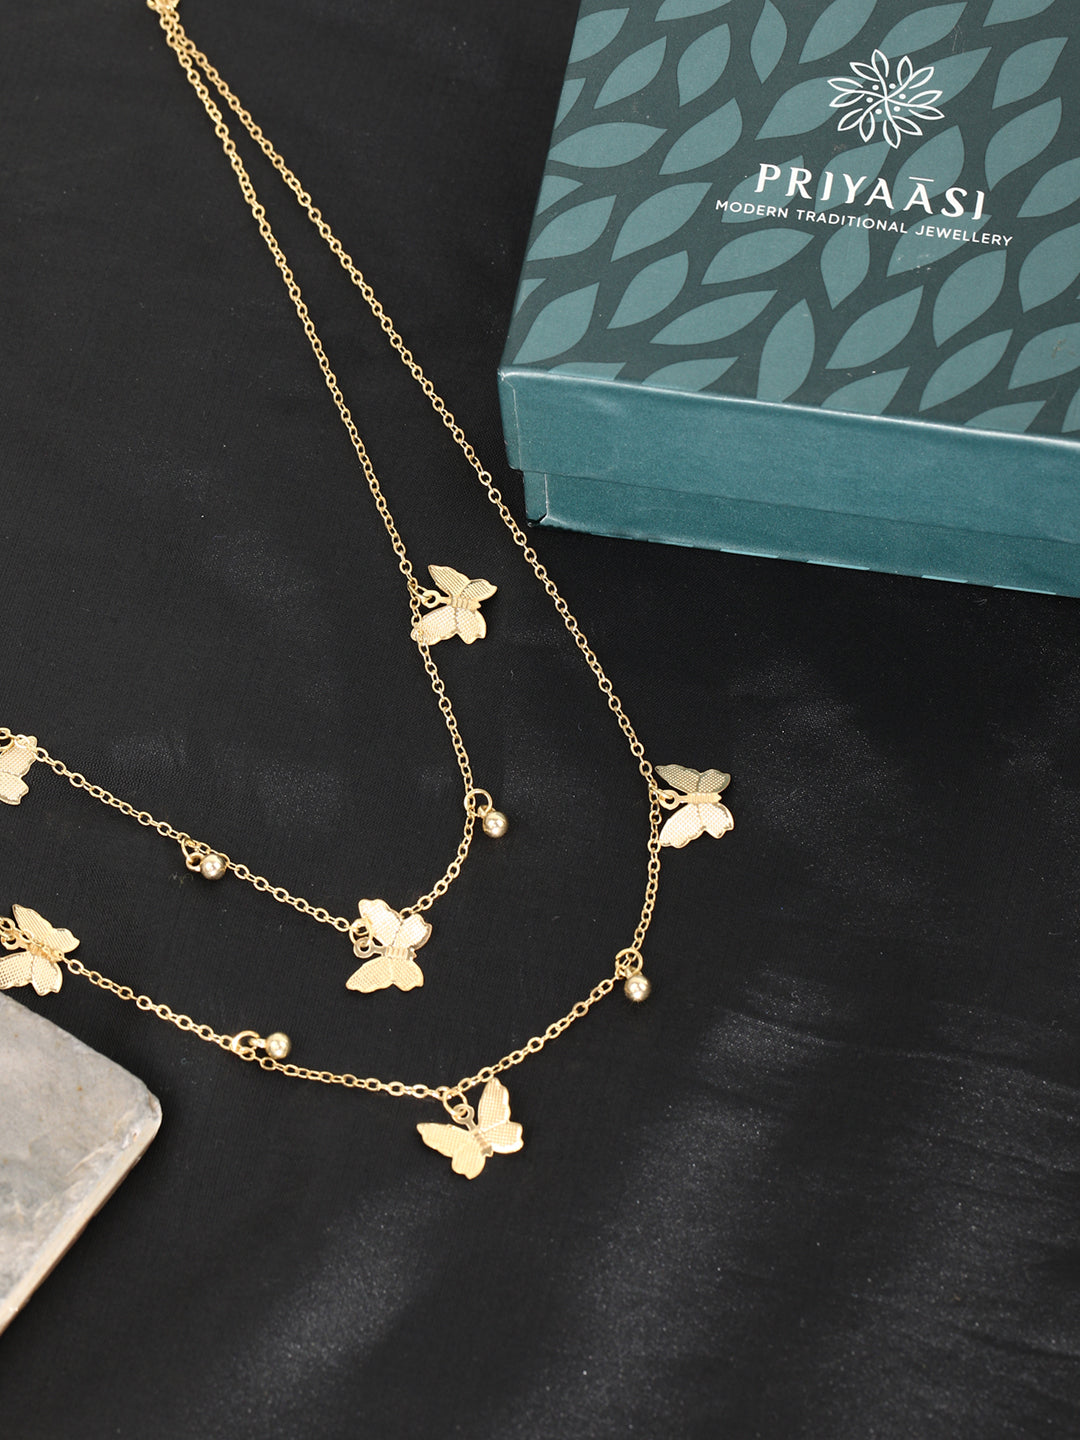 Women's  Gold Plated Butterfly Charm Necklace - Priyaasi